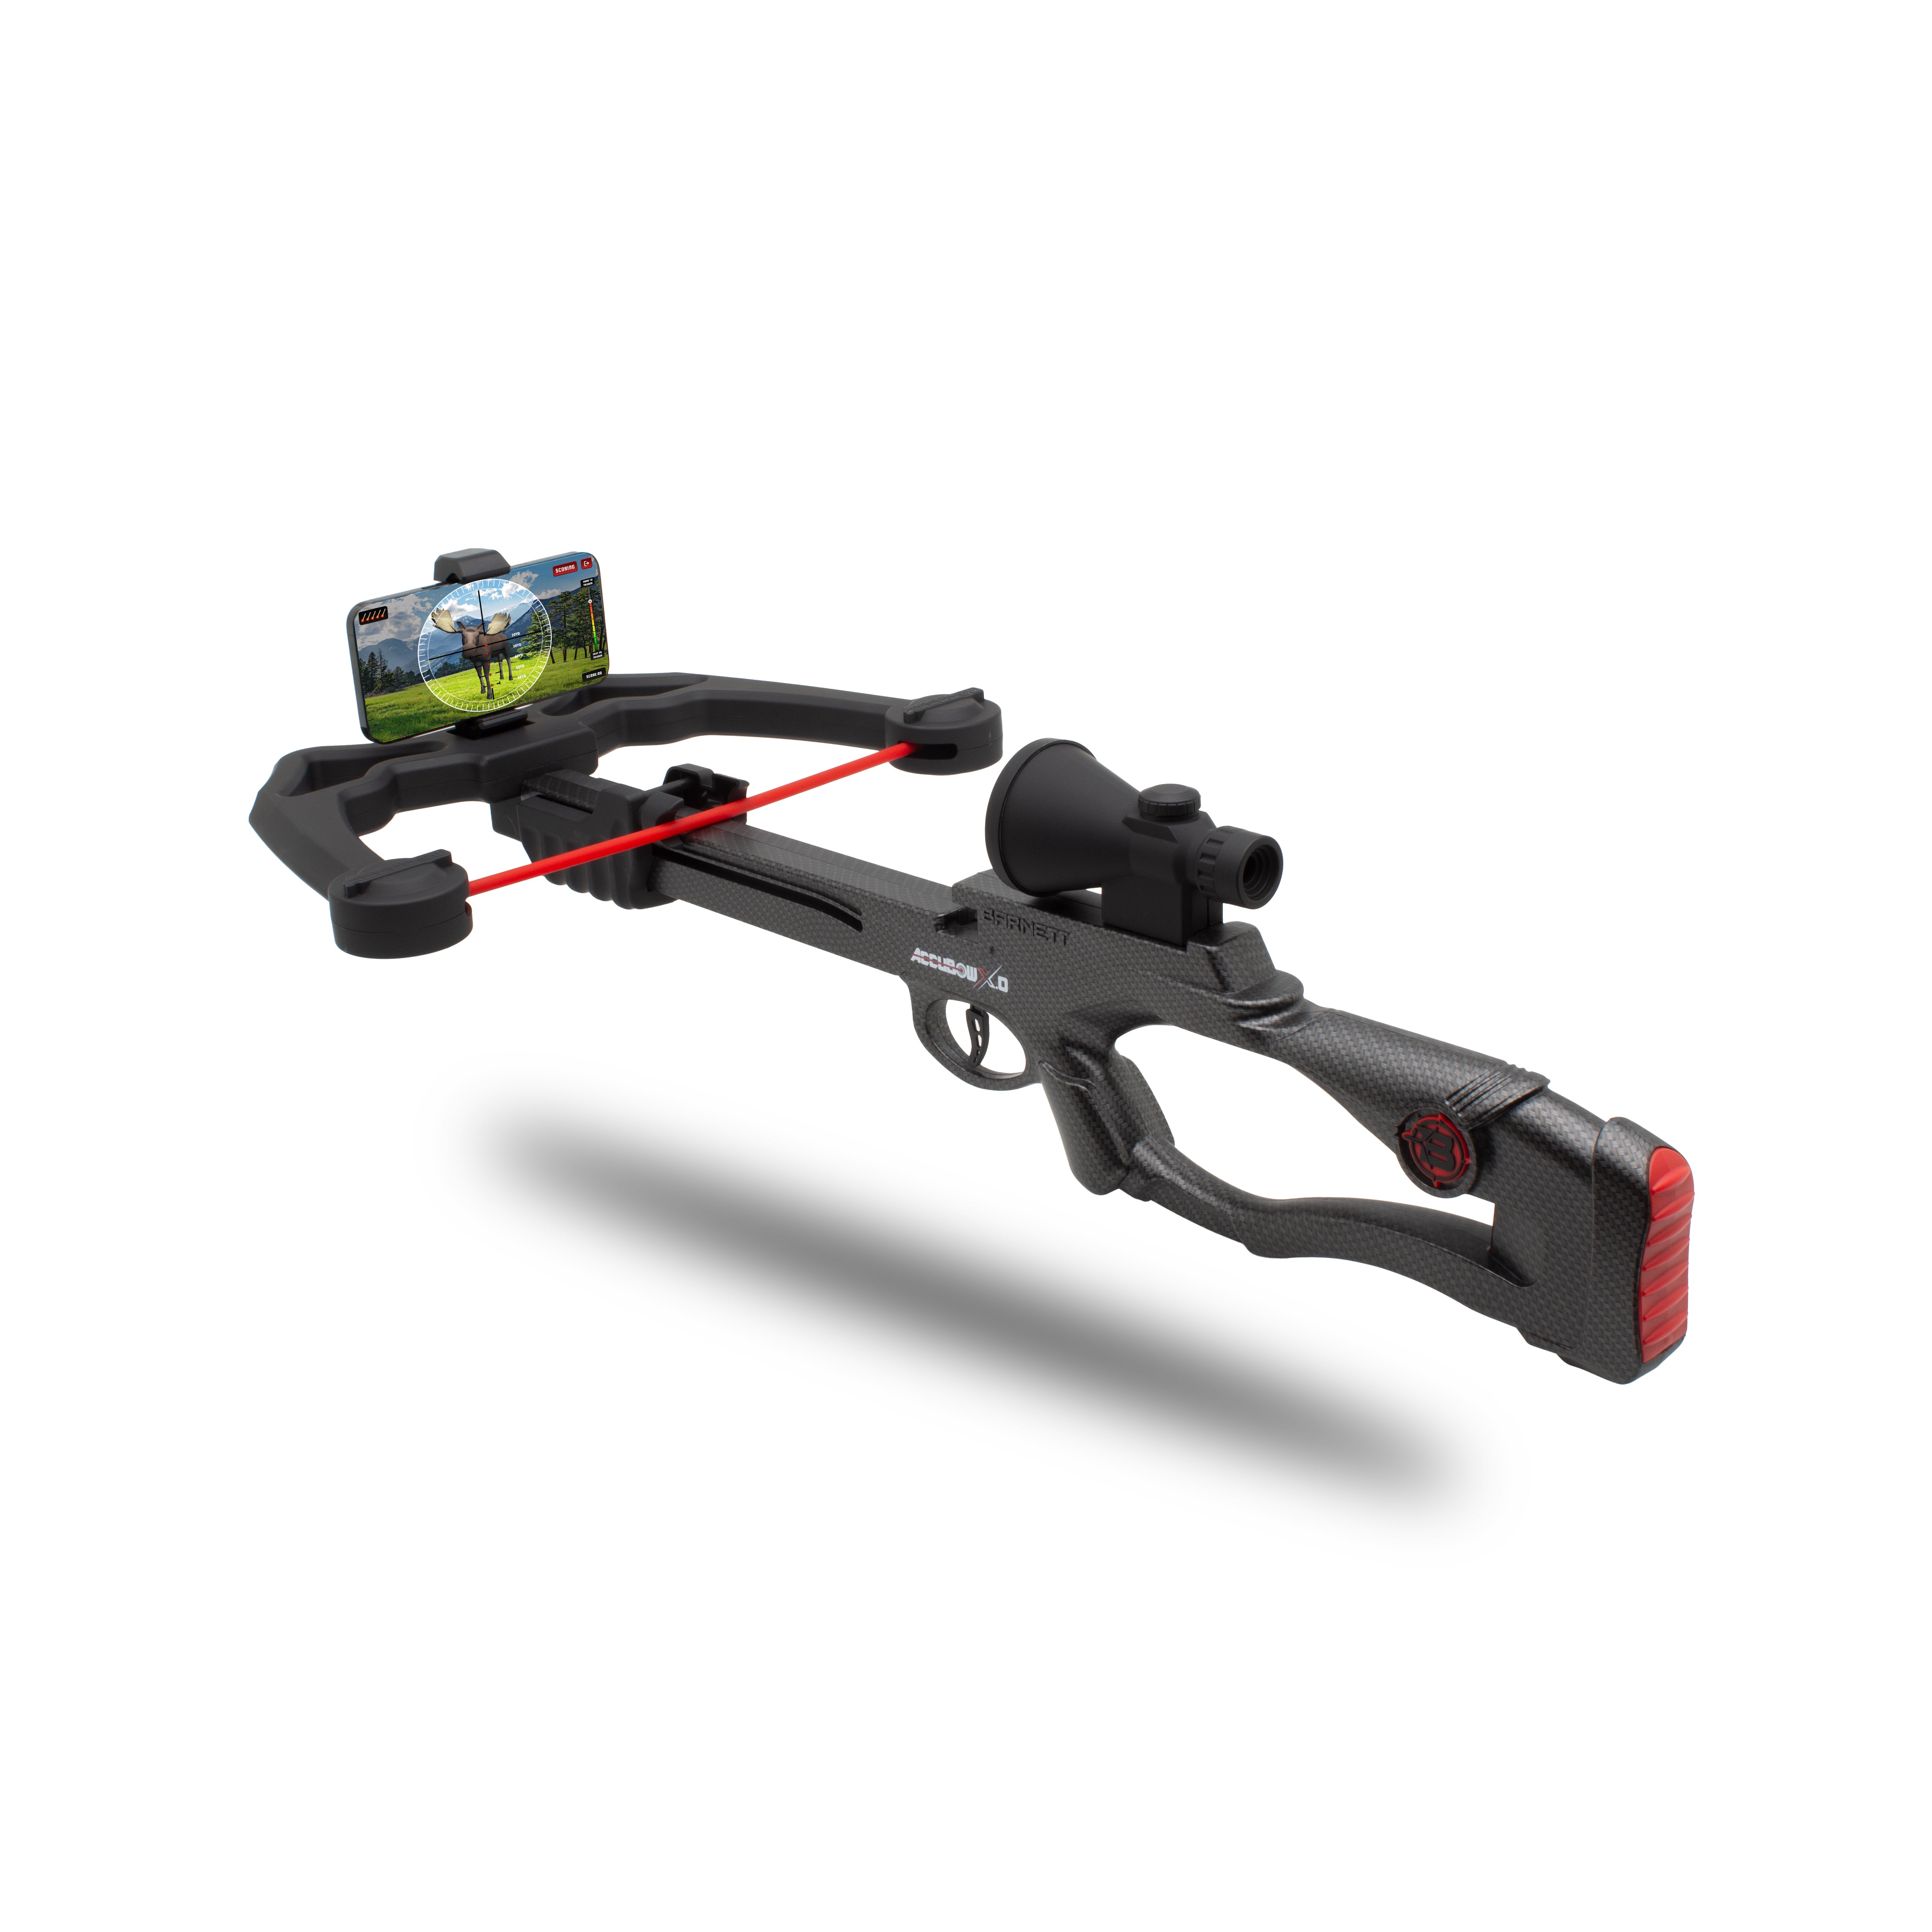 AccuBow X.0 Crossbow Trainer